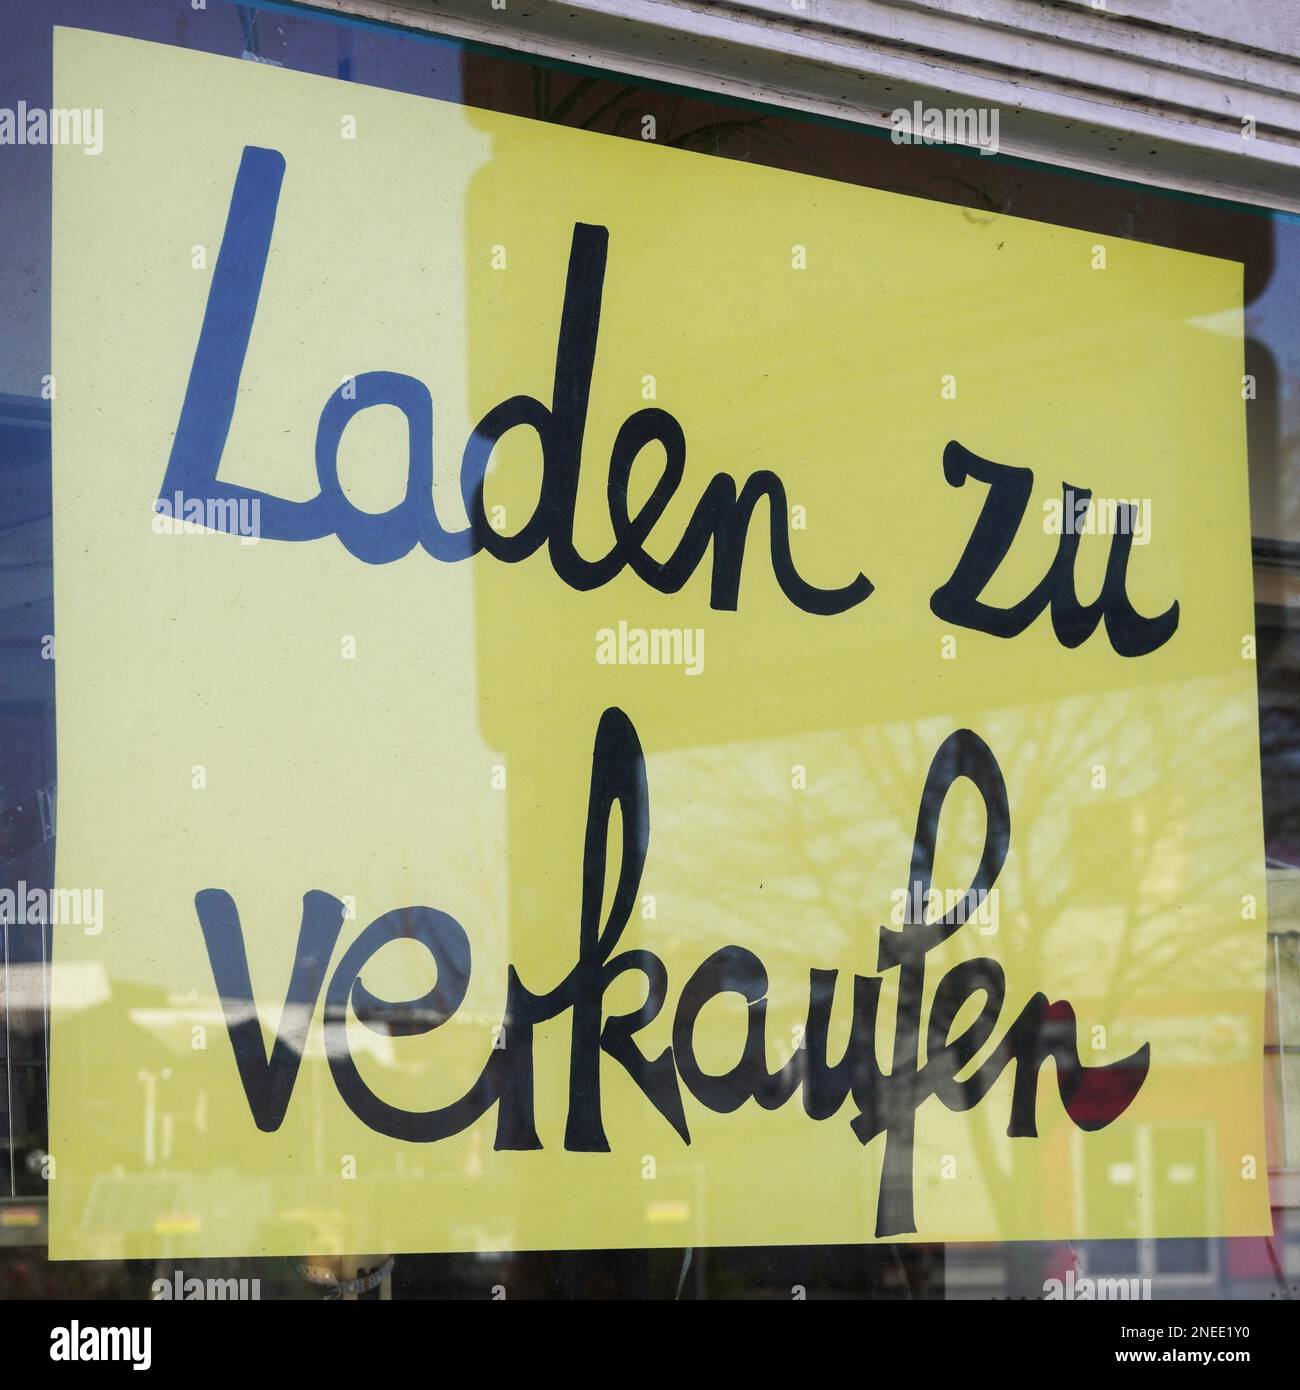 Laden zu verkaufen translates as store for sale in german - sign in shop window - economy crisis or business closure concept Stock Photo